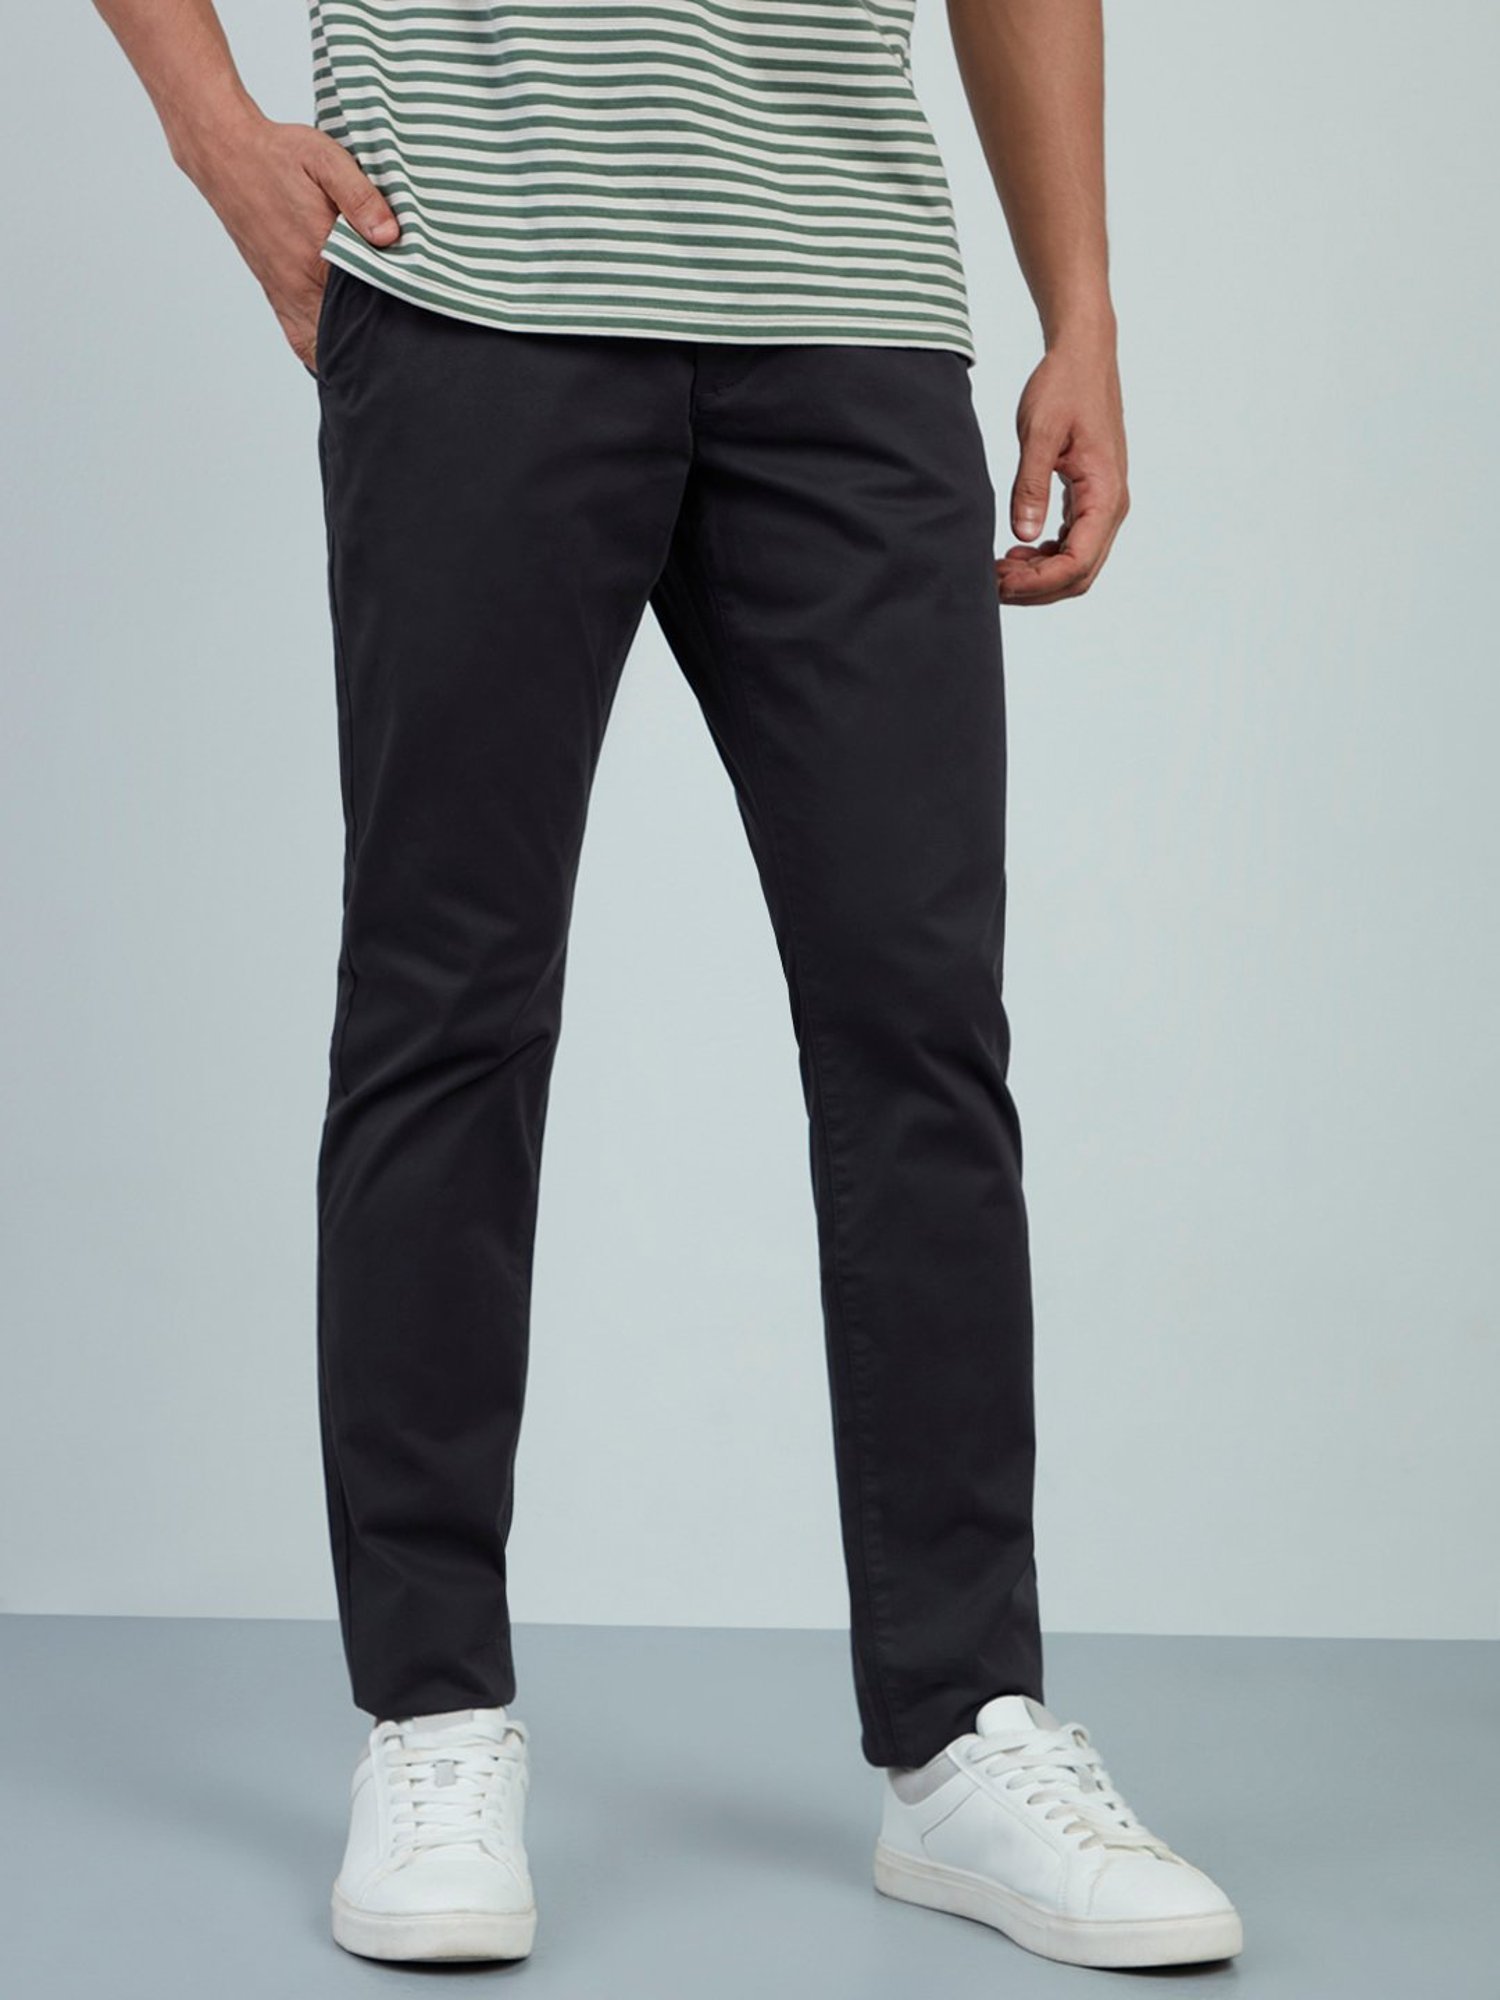 Buy Black Trousers & Pants for Men by MAX Online | Ajio.com